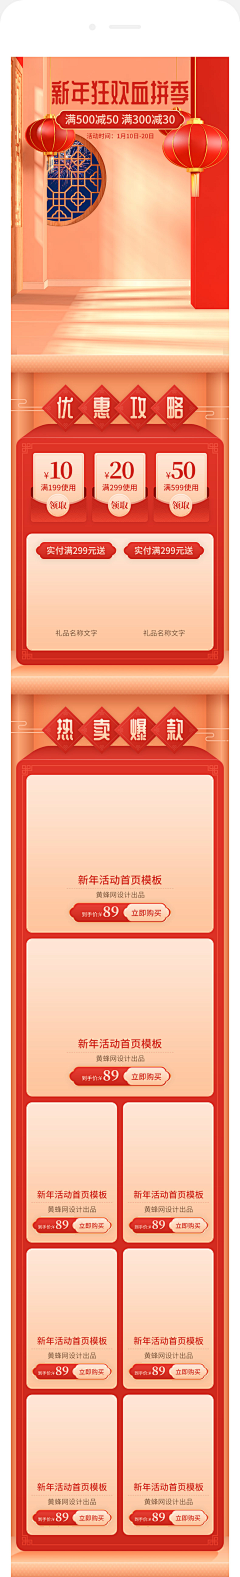 WENWENzyw采集到banner